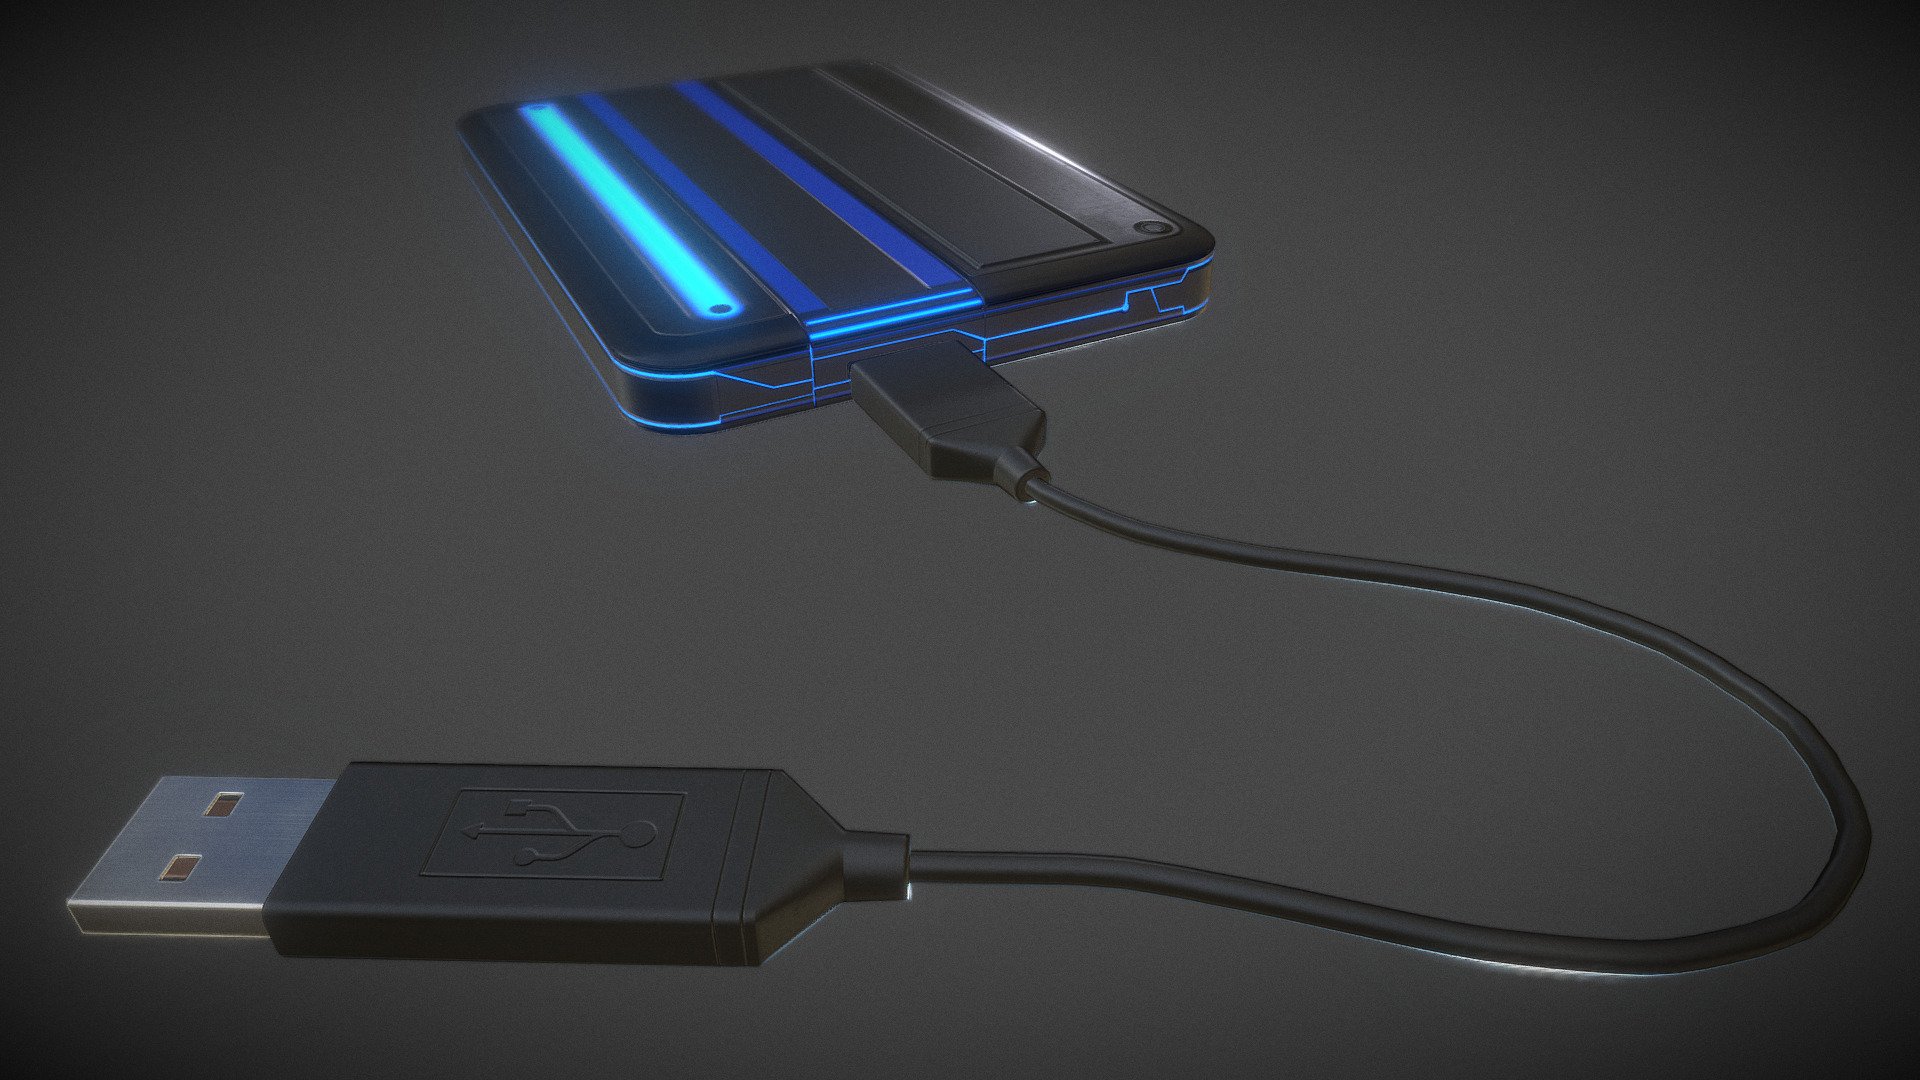 An External HDD with USB cable rigged and animated (Futuristic Version).

Demo video in Blender: 
https://www.youtube.com/watch?v=1ikRFZXRTTU 



Polygons: 1928 
Vertices: 1943 
Triangles: 3644 



Available formates: 



fbx (7.4 binary and 6.1 ASCII) 



obj and mtl 



dae 



blend (2.78) 



stl 



abc (Alembic) 



ply 



x3d 



x 



dxf 



wrl 



---------------
PBR Textures: 



Normal map 



Color map 



Metalness map 



Roughness map 



Ambient occlusion map 



Curvature map 



All textures in 4096 x 4096 px resolution 




Modeled, rigged and animated in Blender 2.78a 3d model